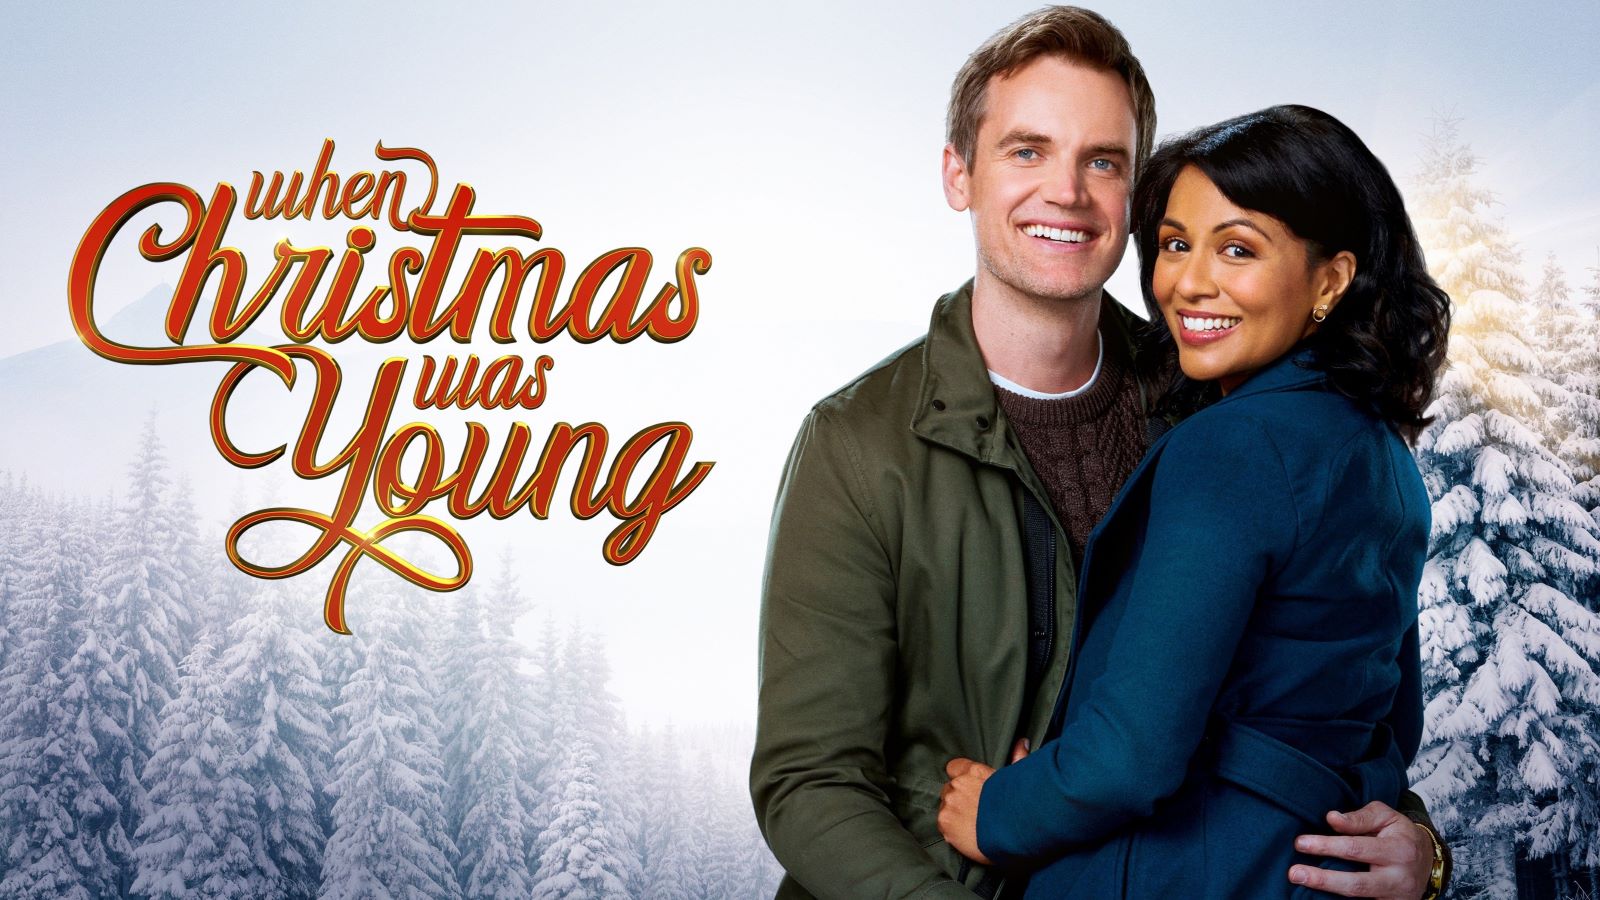 How to Get Christmas Plus on TV: A Beginners Guide to Watching Your Favorite Holiday Shows